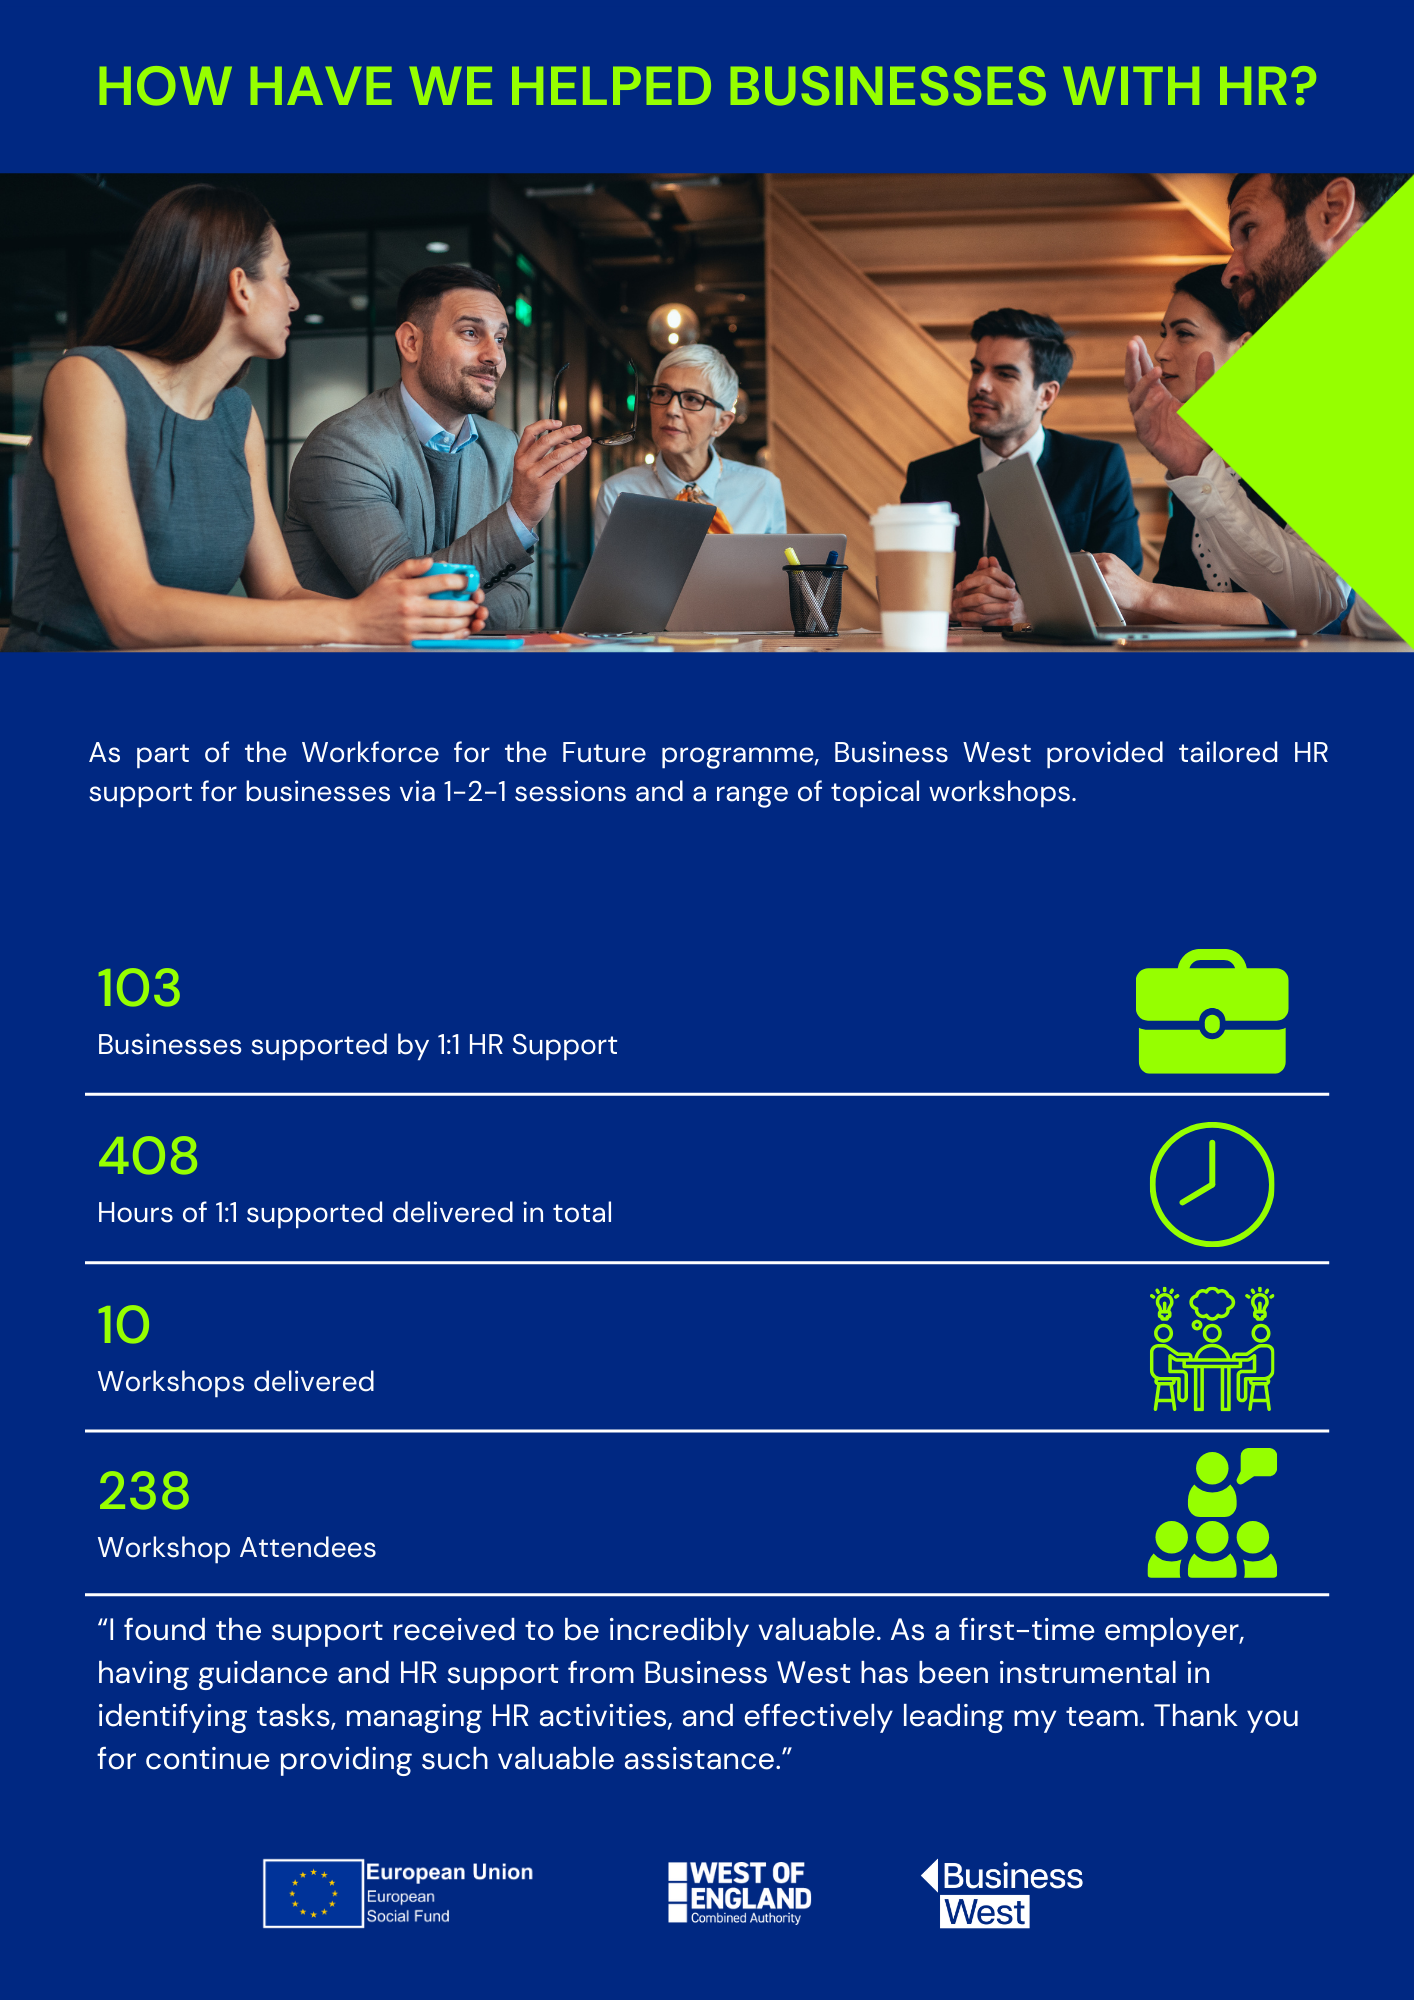 Statistics from the Workforce for the Future Programme